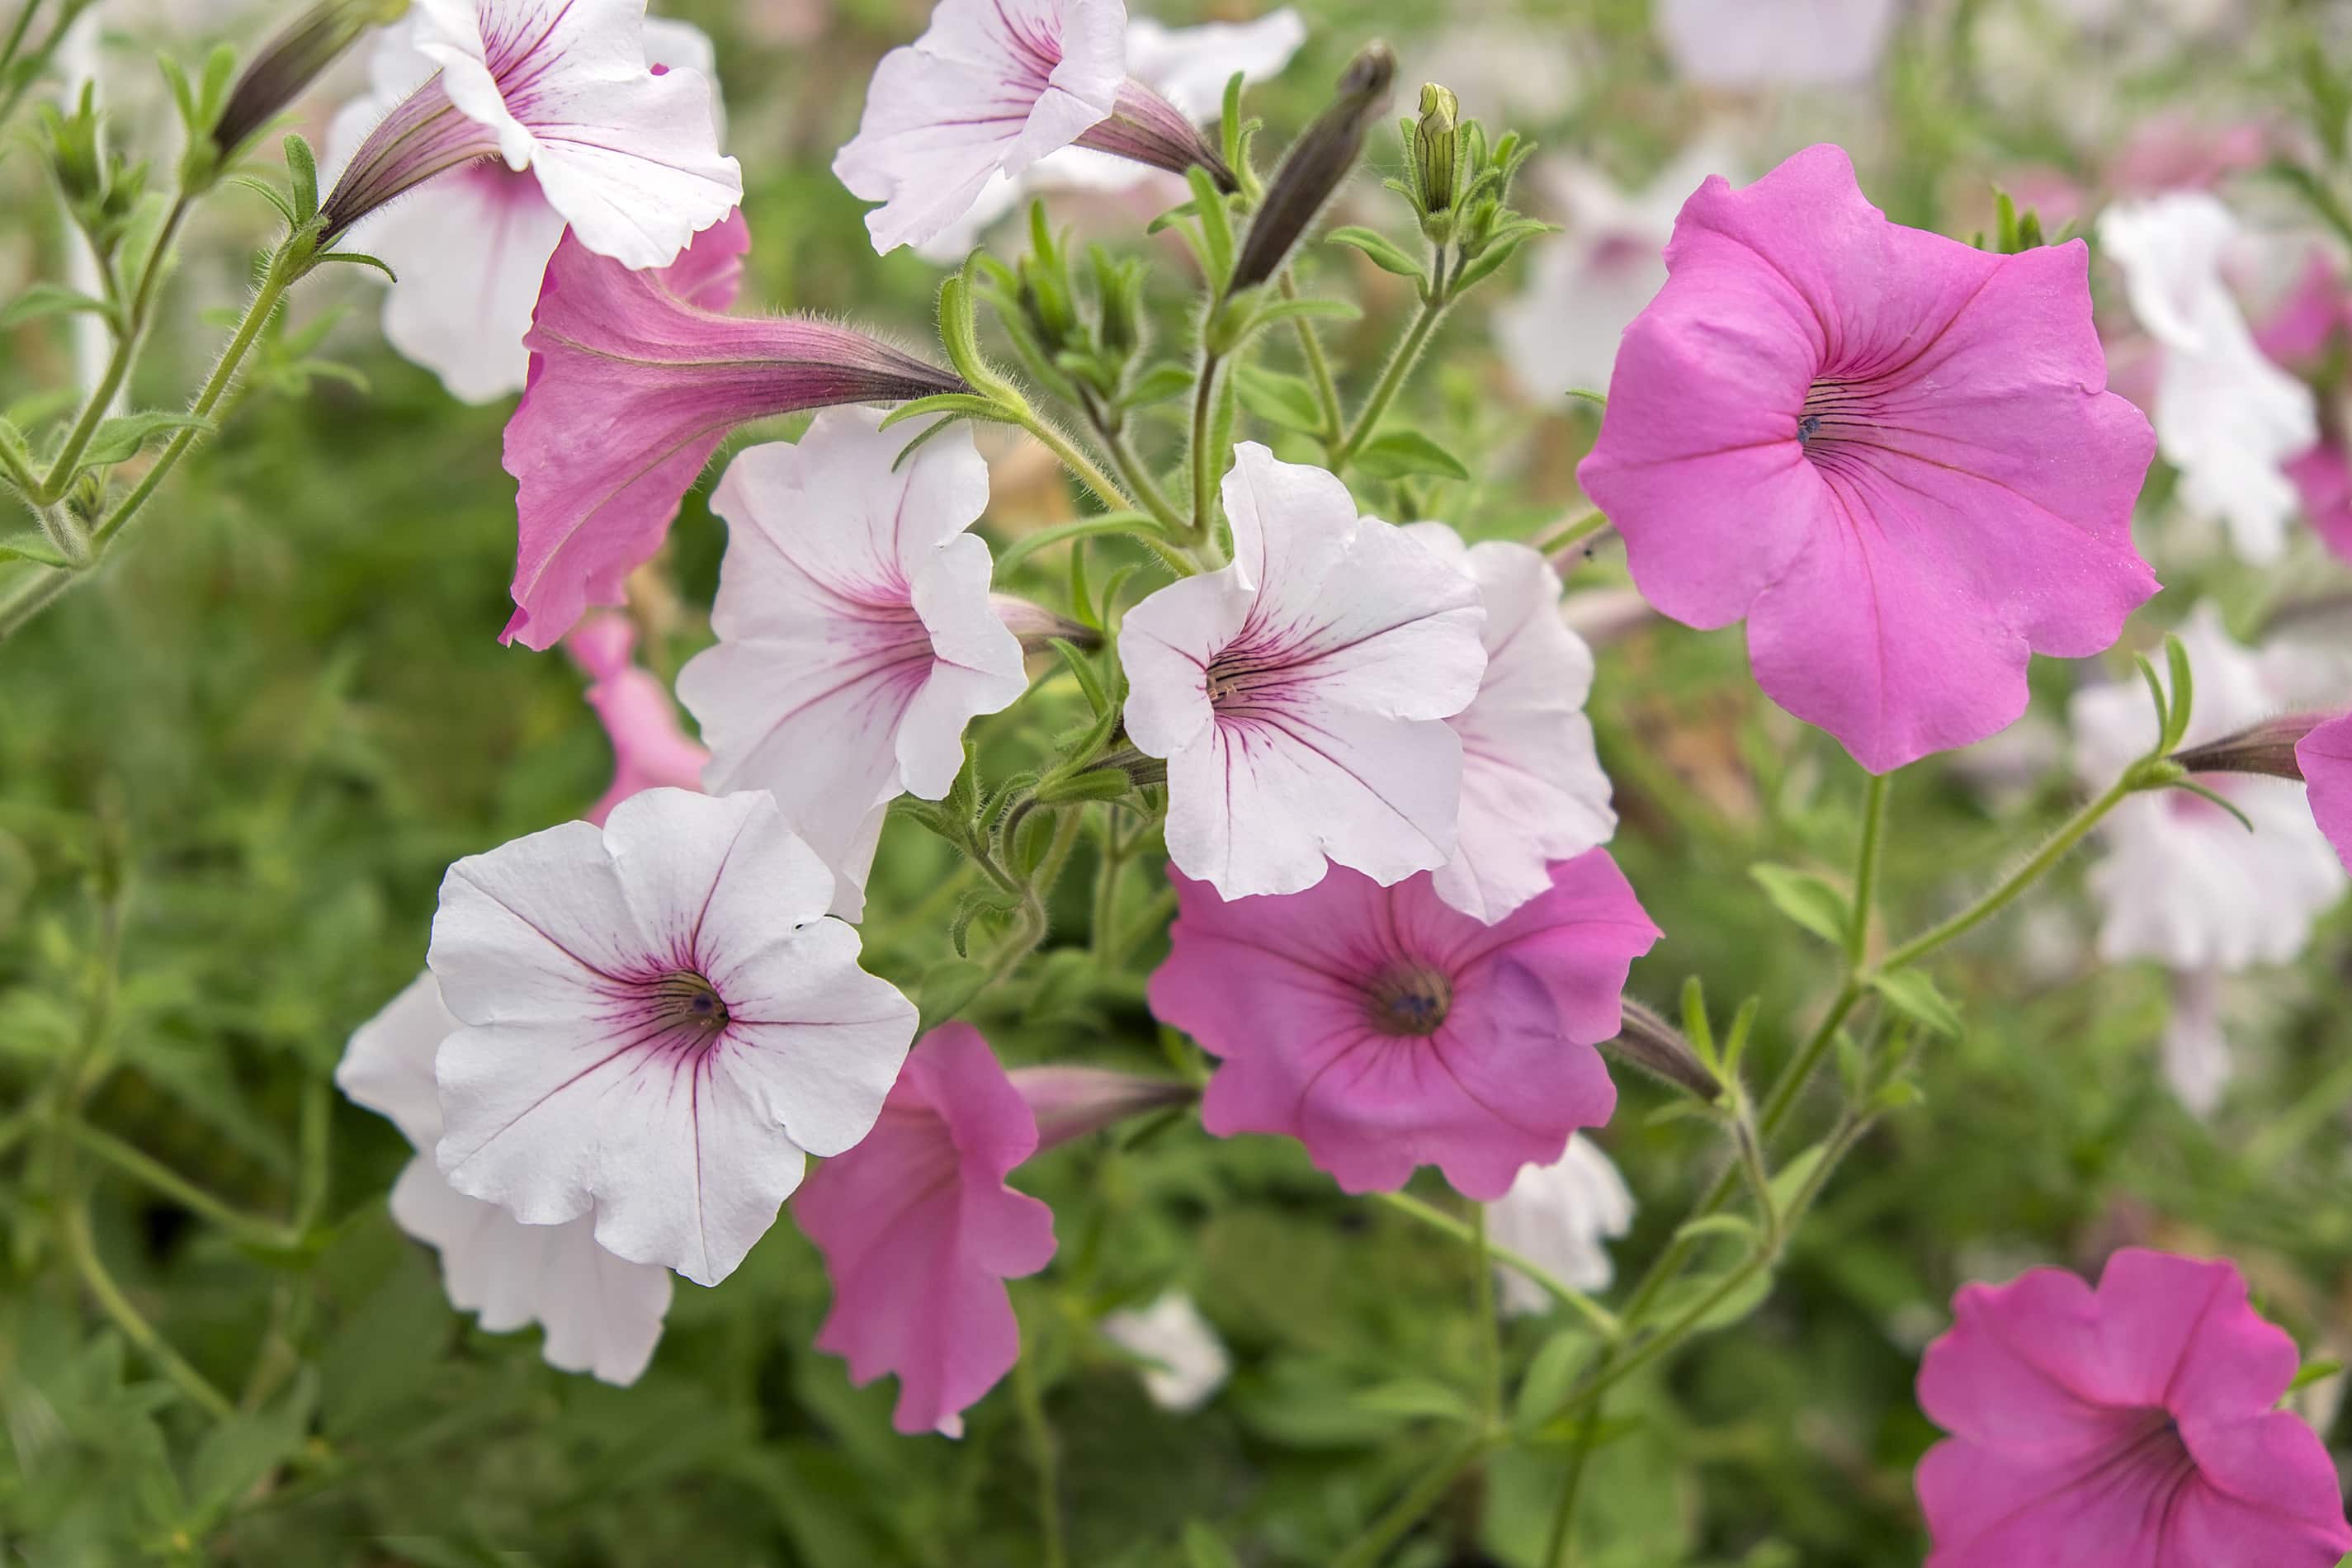 Pink and white petunias growing together.